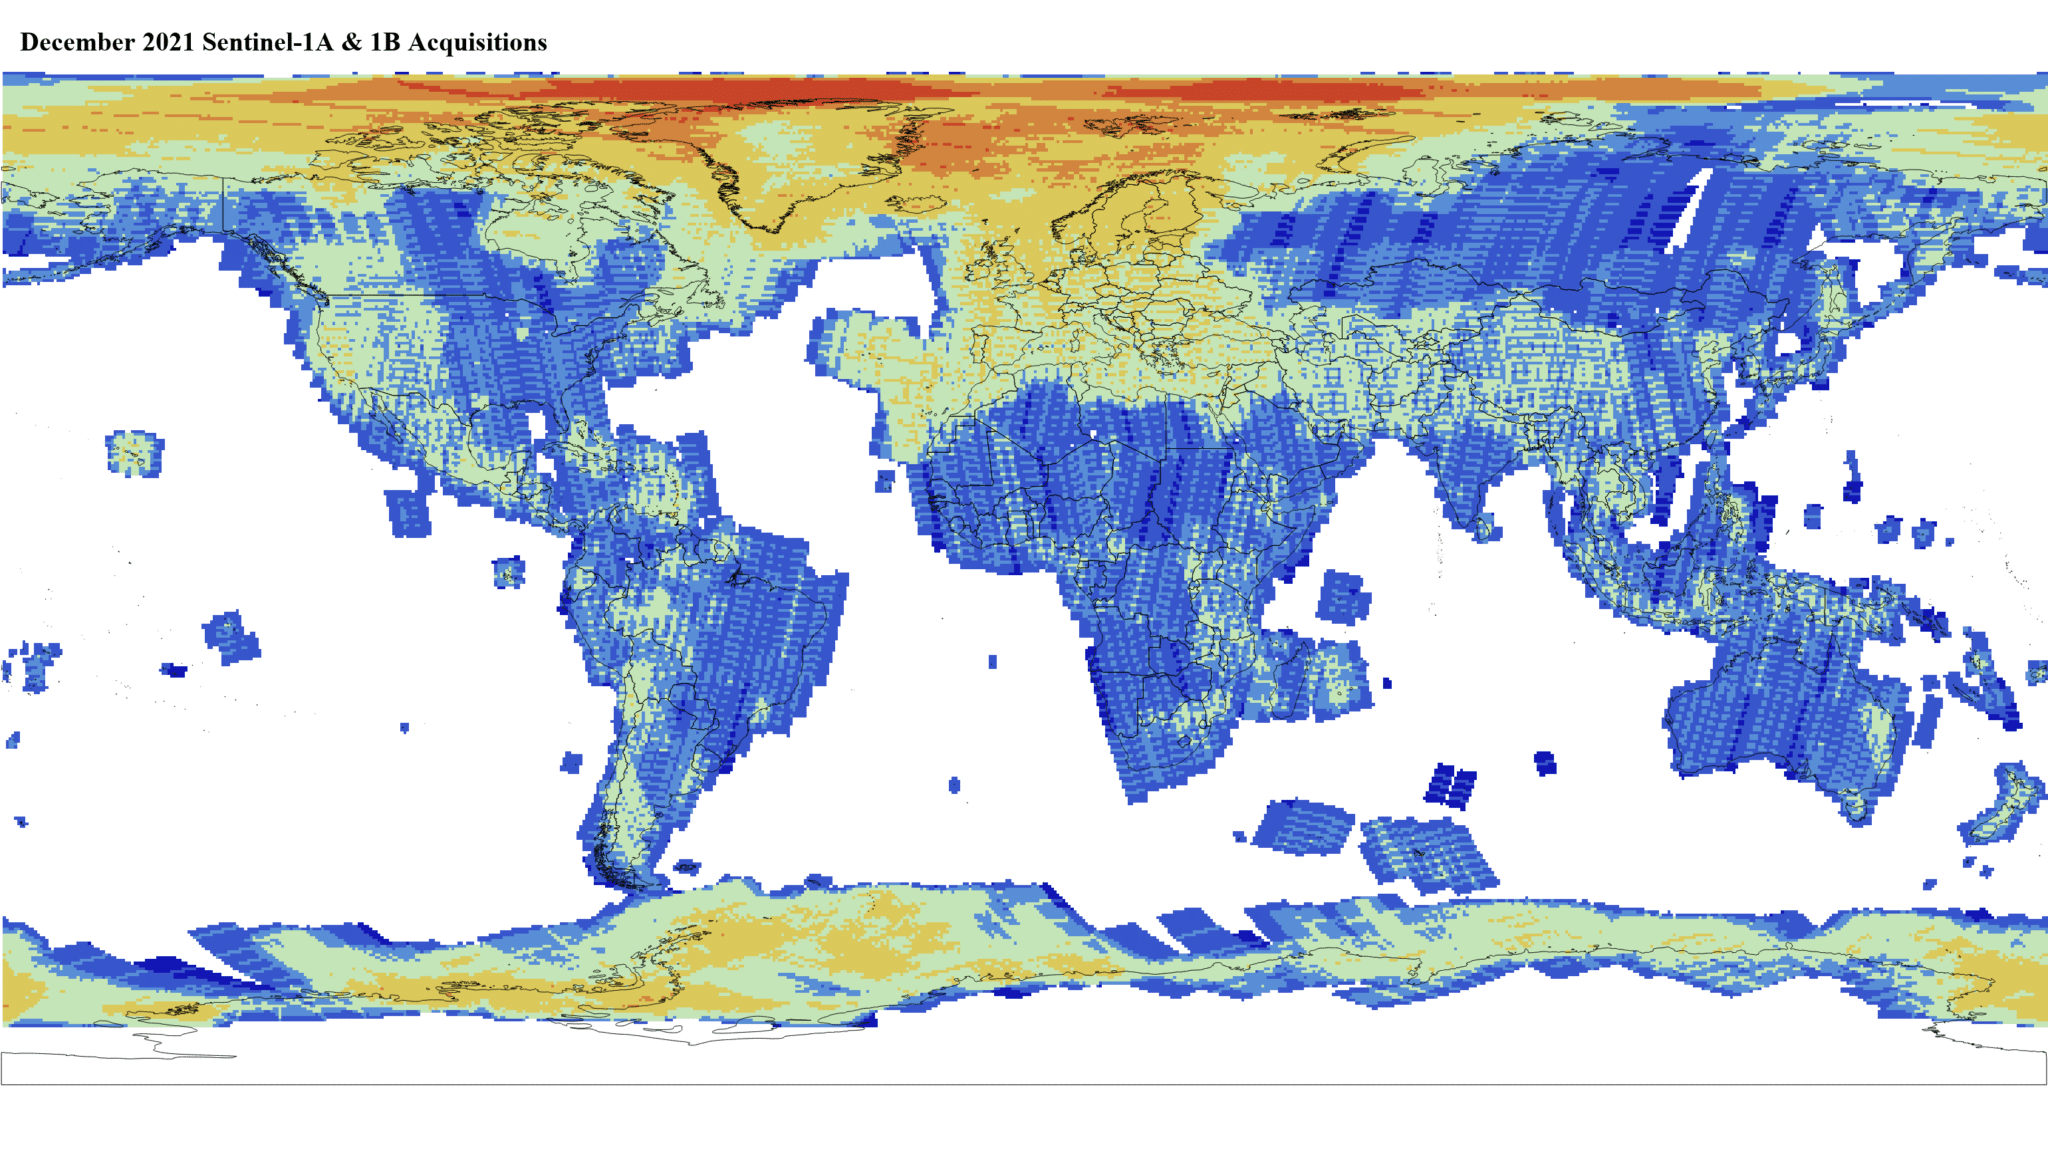 Heat map of Sentinel-1A and -1B GRD global acquisitions December 2021